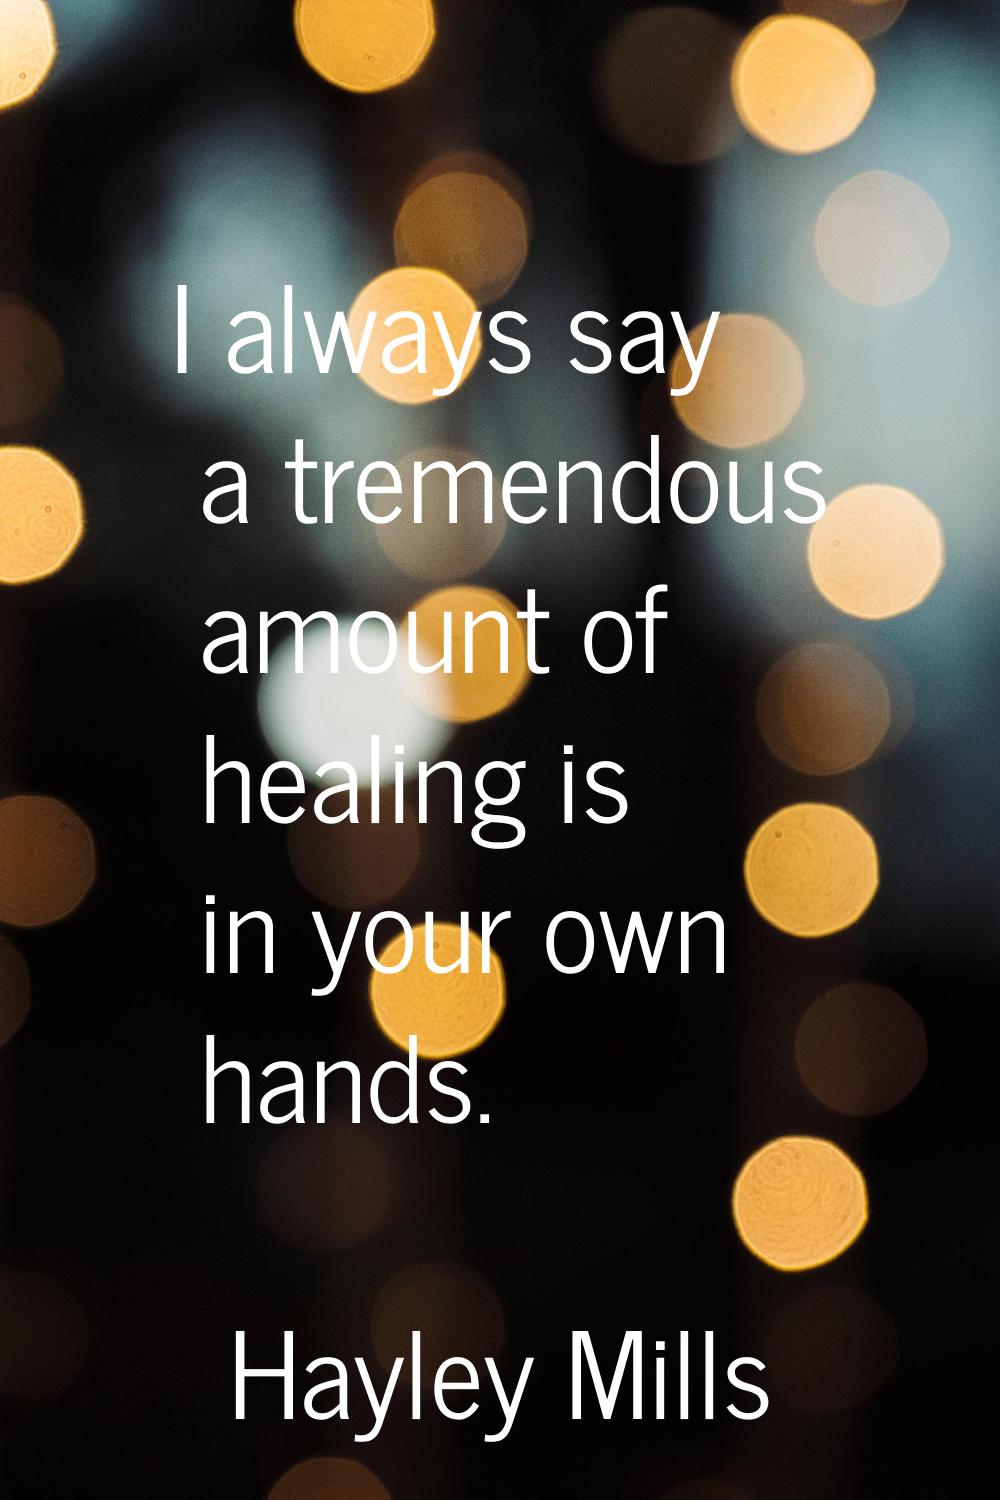 I always say a tremendous amount of healing is in your own hands.